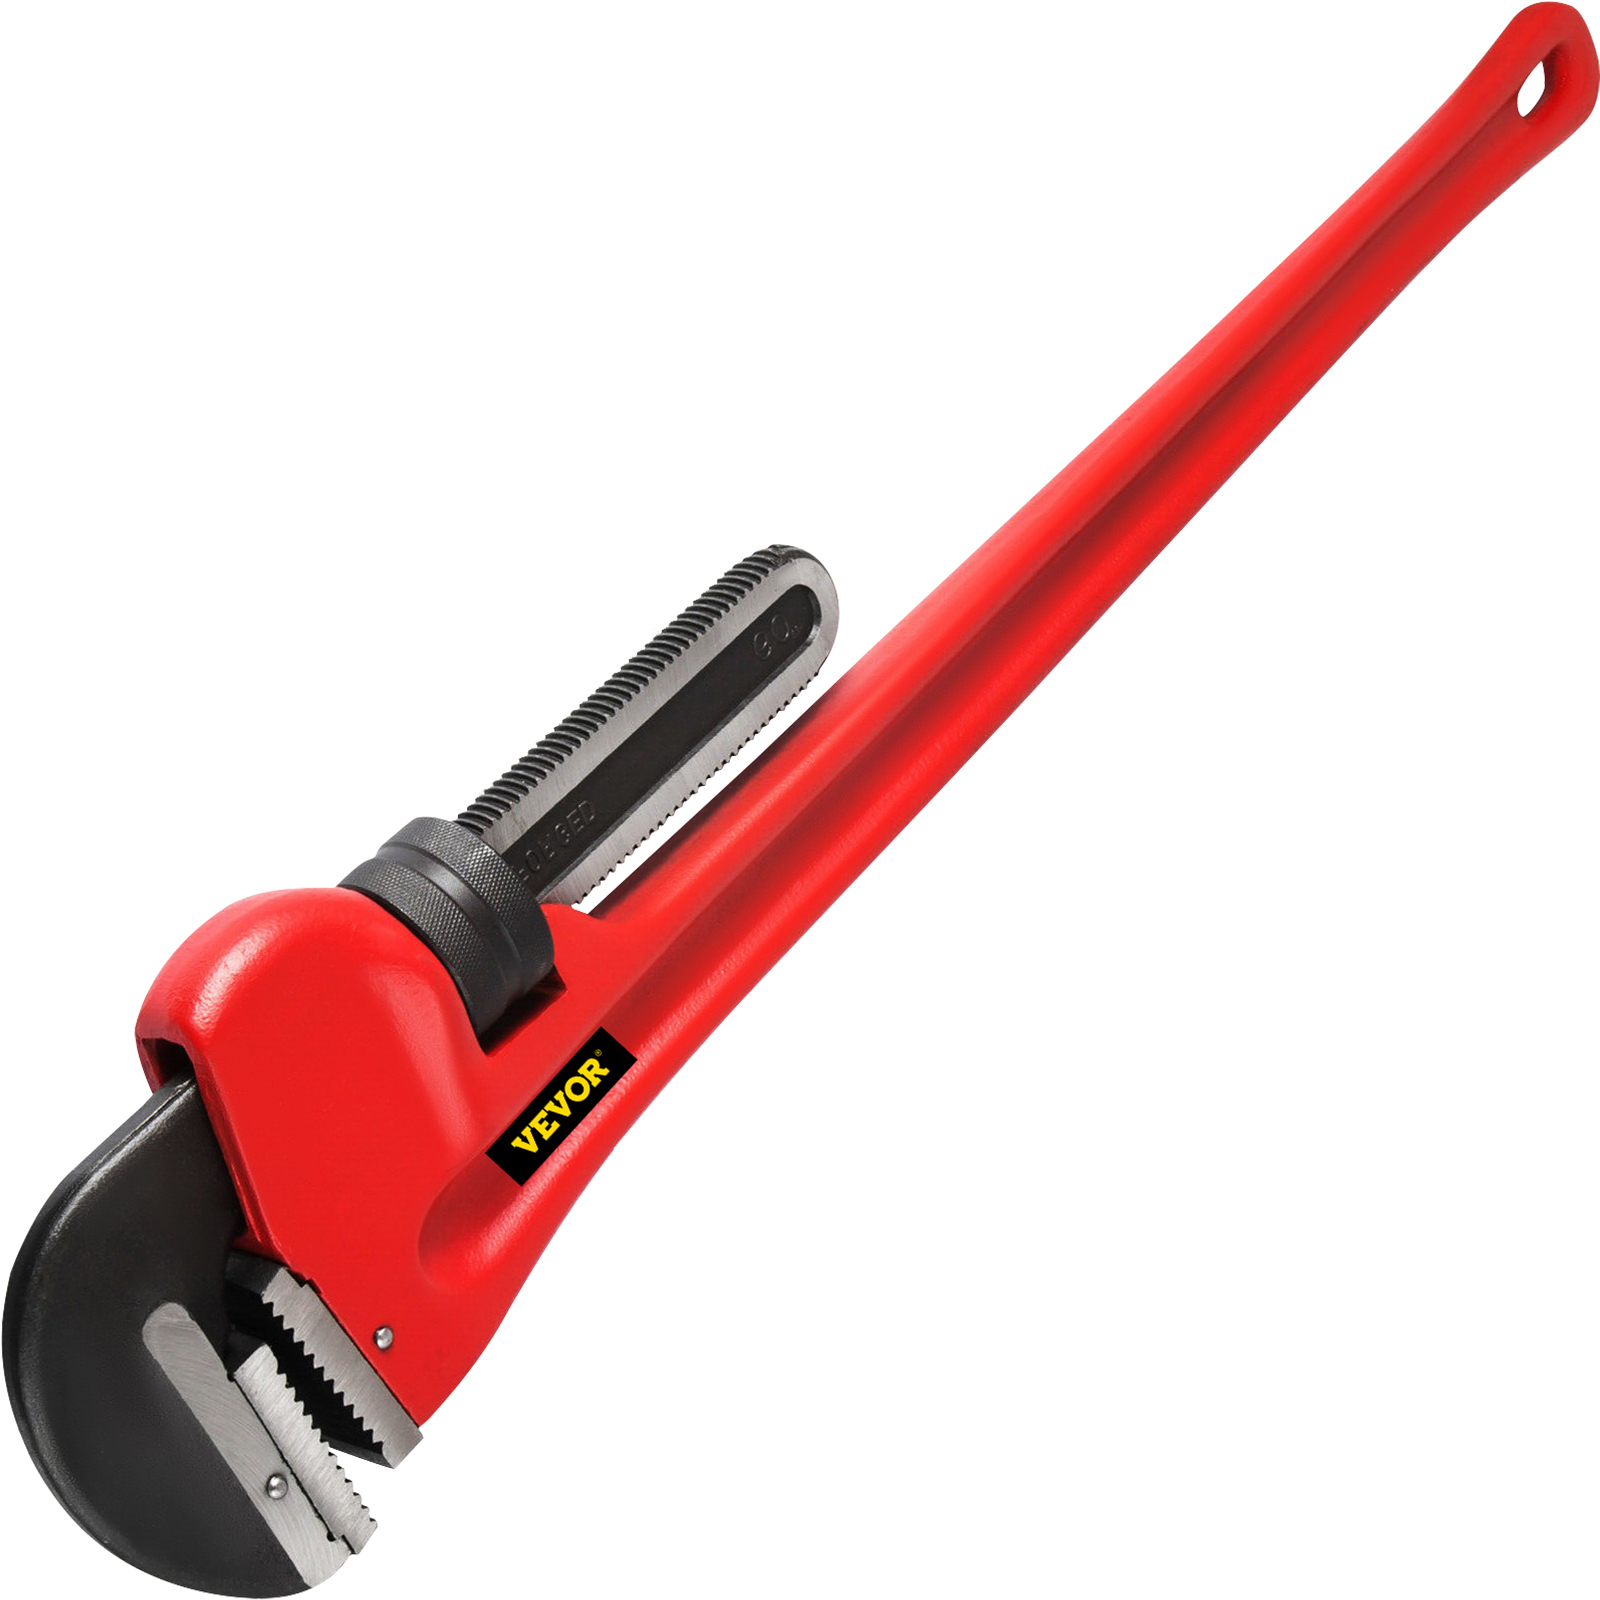 What Is A Monkey Wrench?